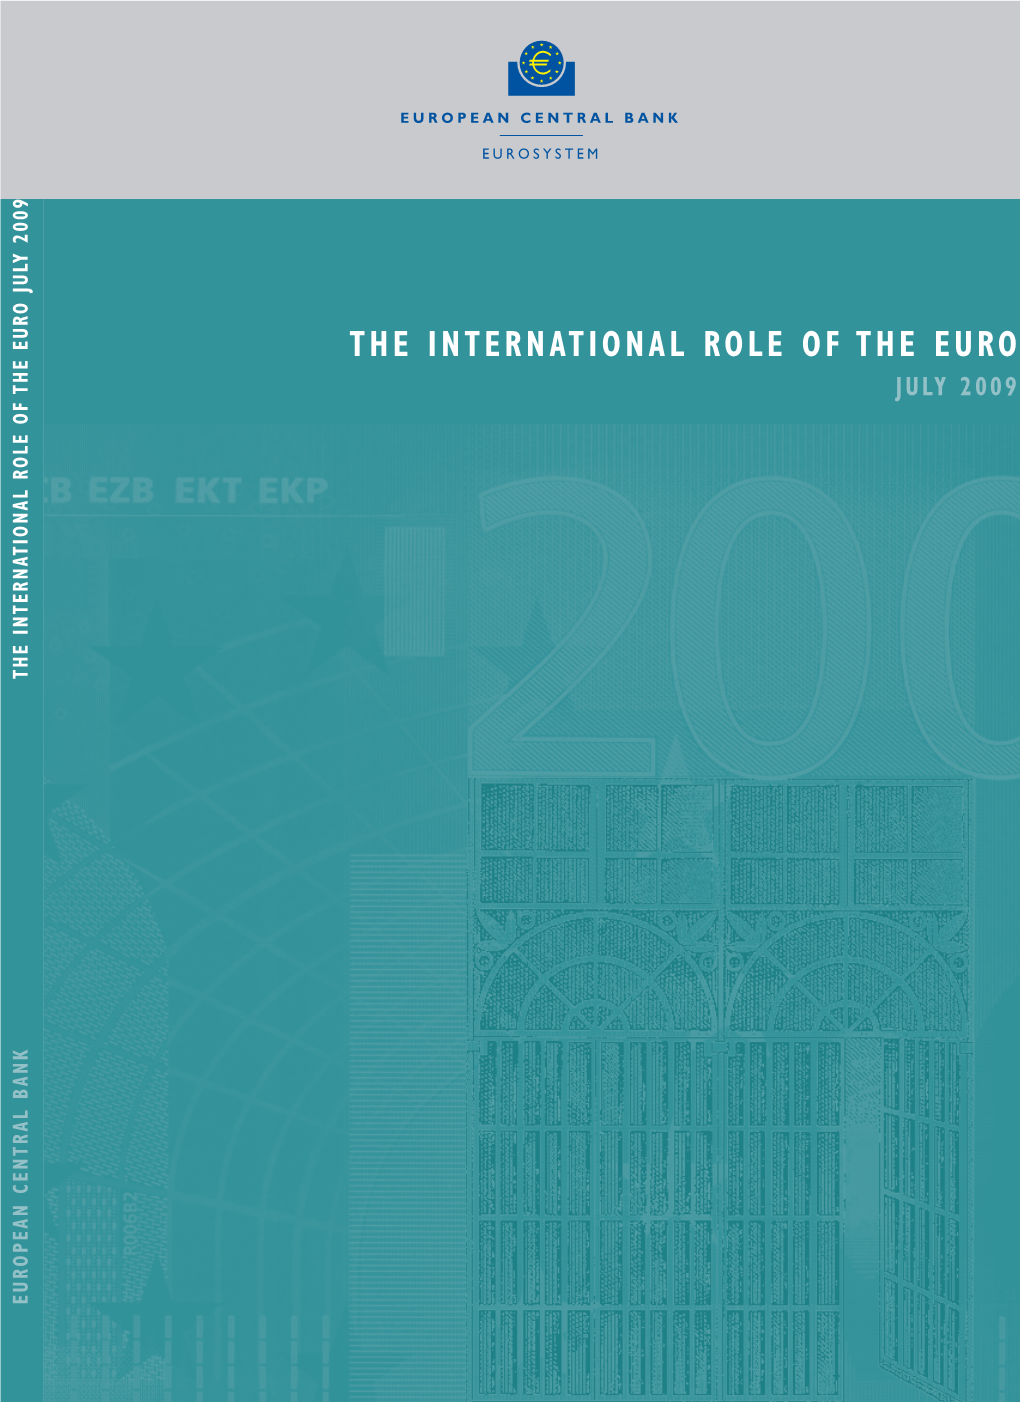 The International Role of the Euro, July 2009